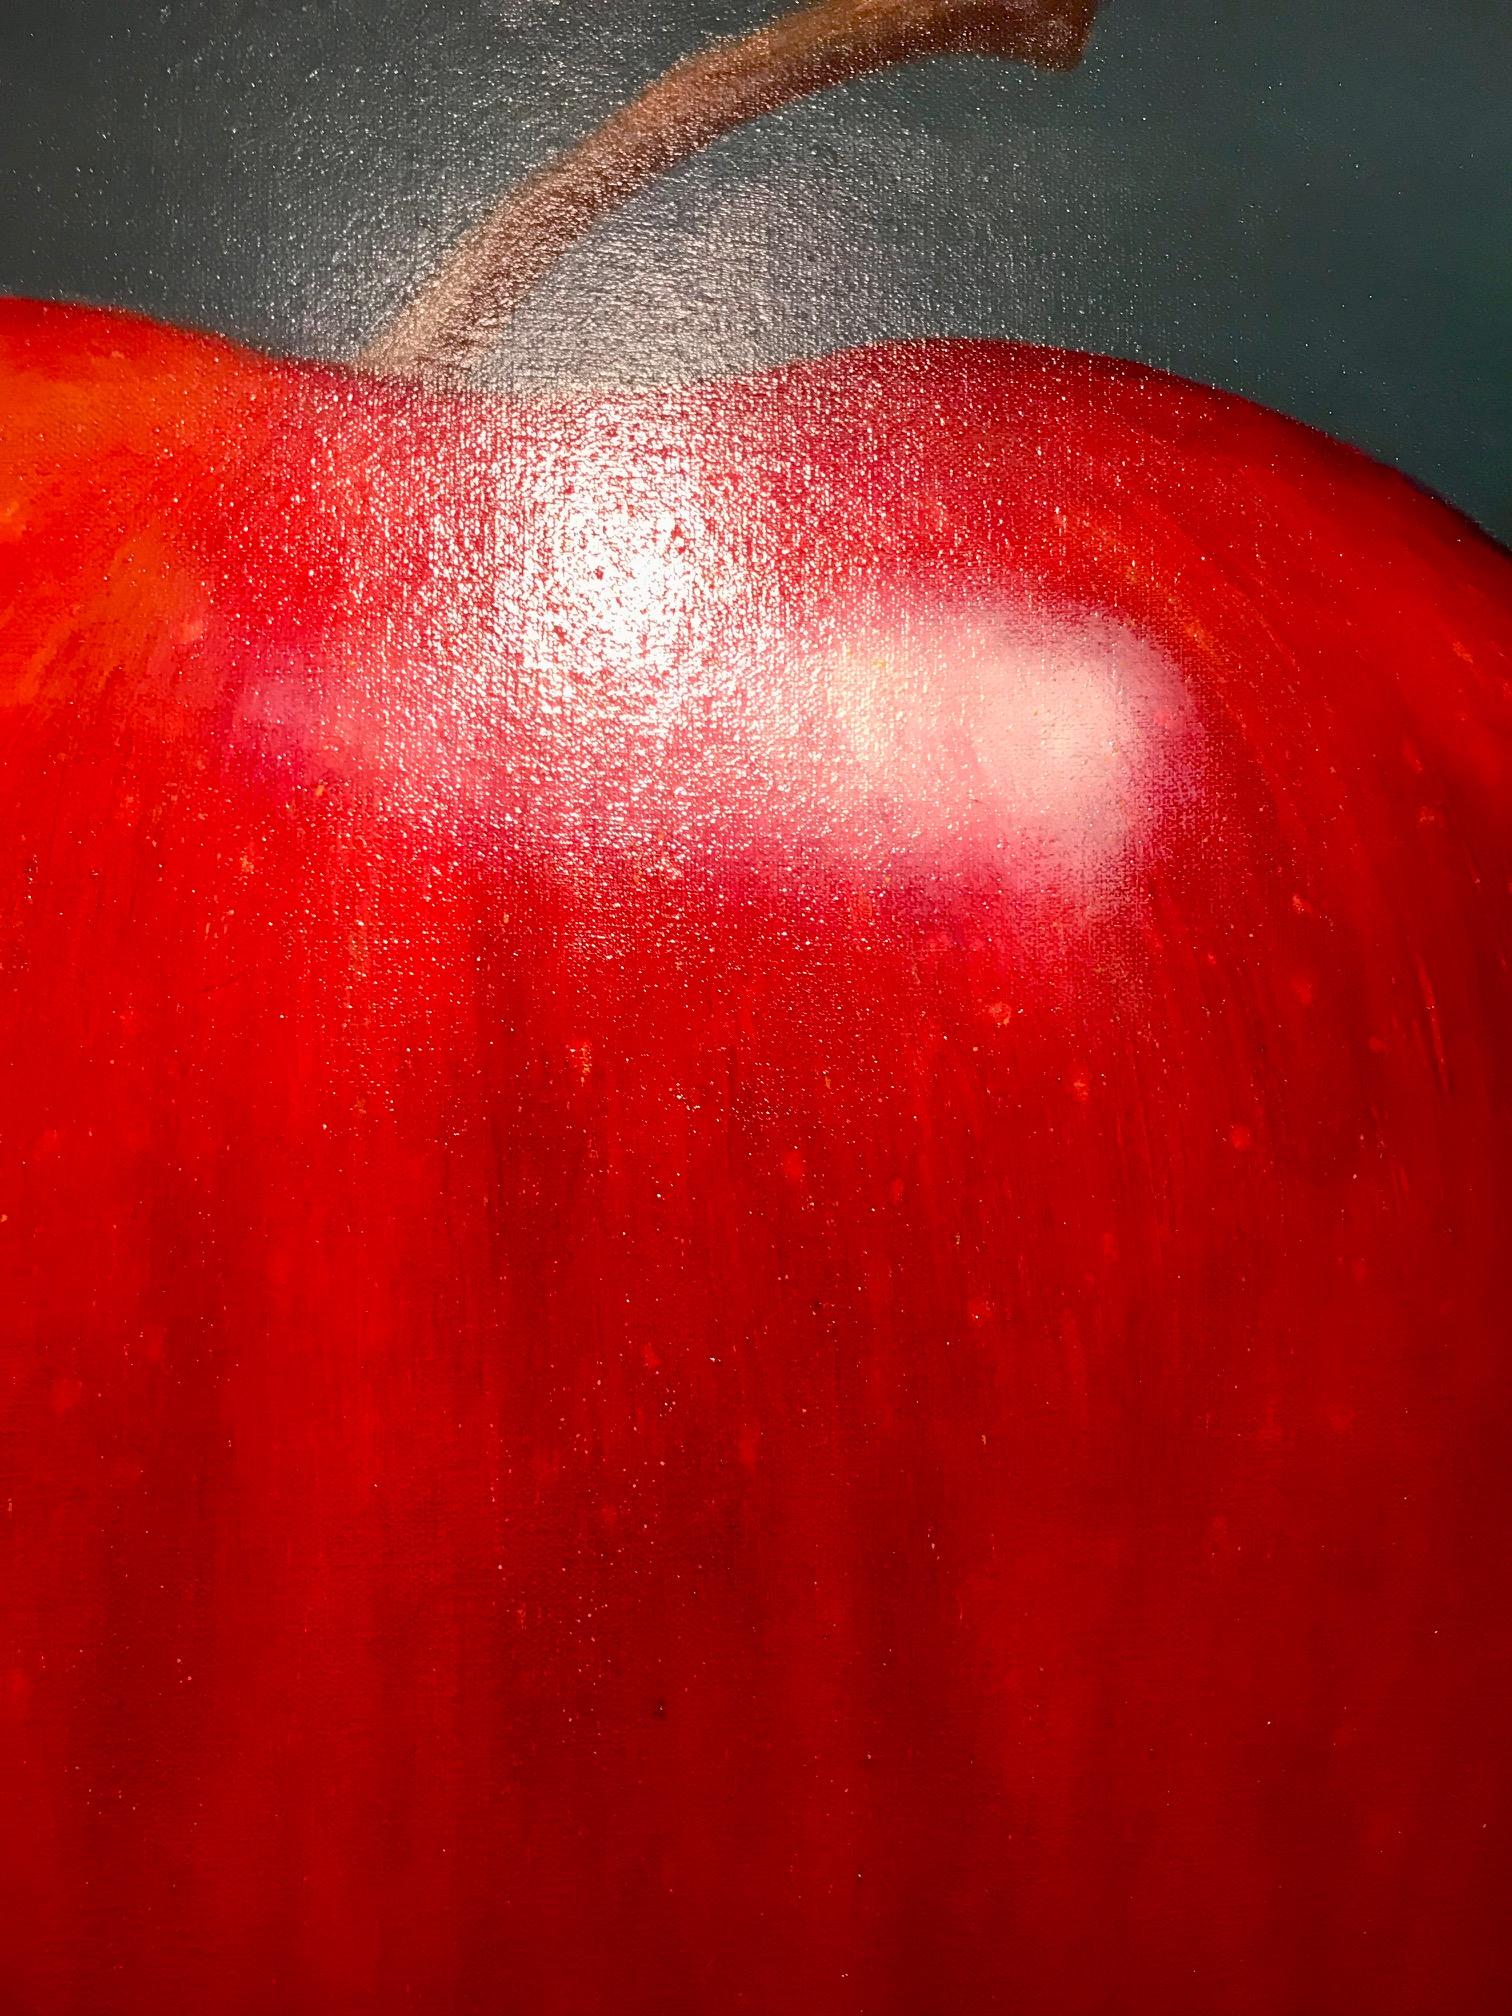 Anthony Ackrill applies his classical training at Florence Academy of Art to create still life studies which are both realistic and dramatic.  Enlightened Apple
is a perfect example of his technique of taking an everyday scene but showing it in an